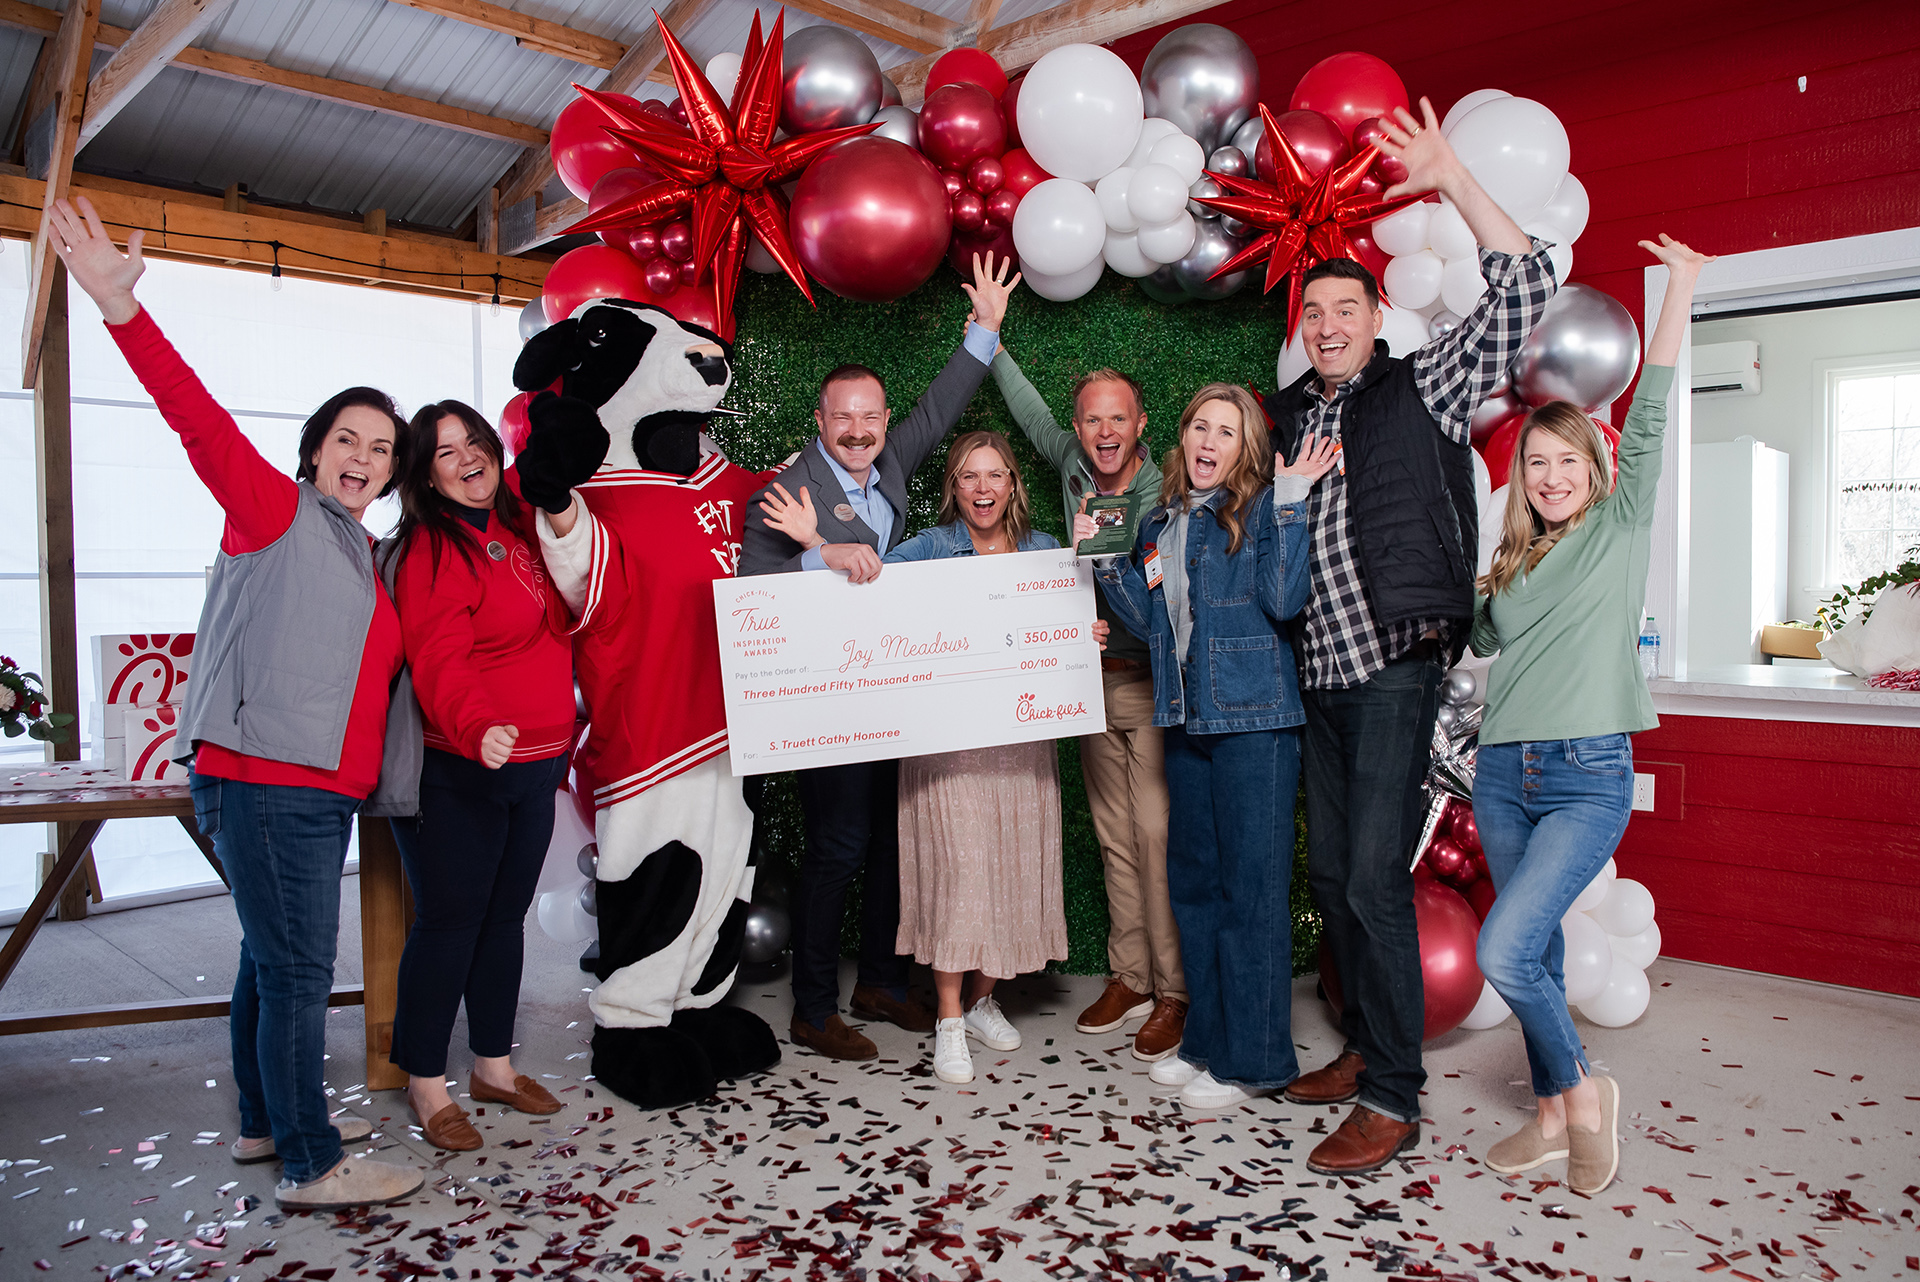 Linwood, Kan. nonprofit Joy Meadows received a $350,000 grant after being named the S. Truett Cathy Honoree for the 2024 Chick-fil-A True Inspiration Awards. The funding will help the organization further its efforts to provide foster families with community support, housing and other resources.